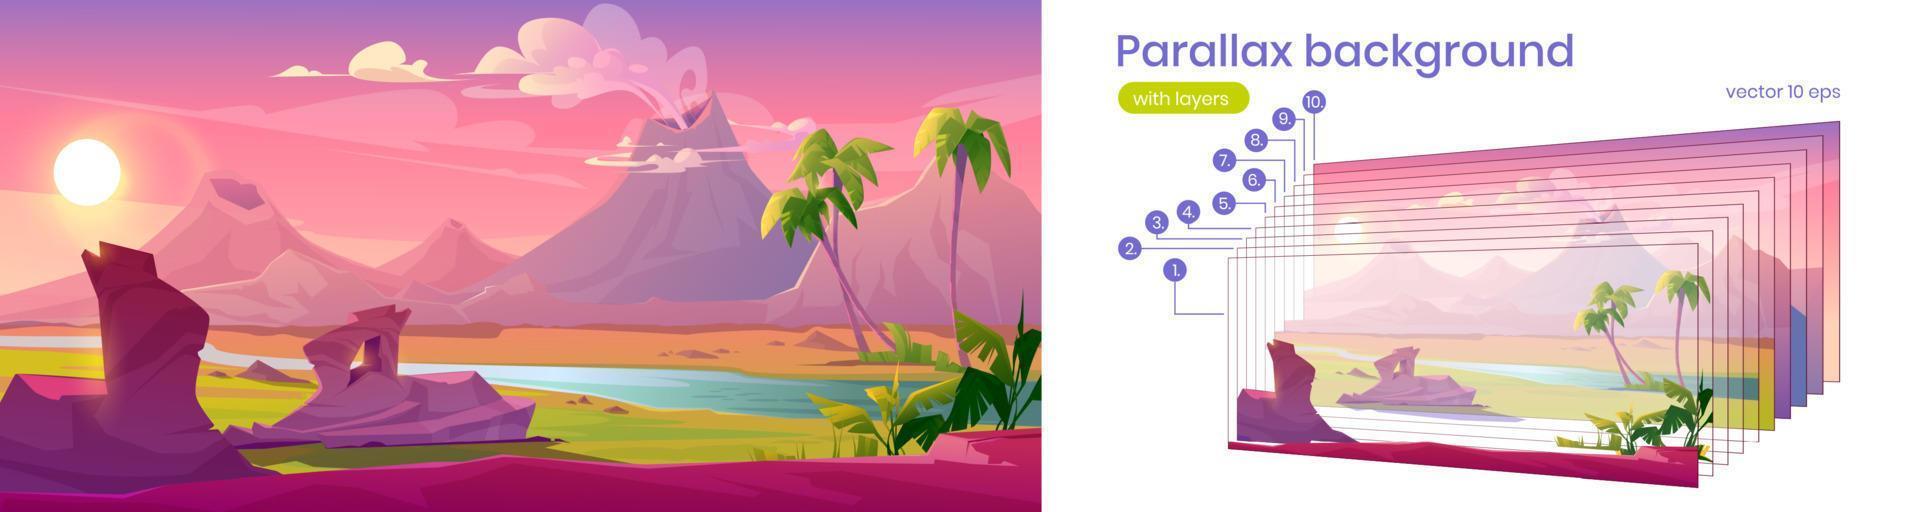 Parallax background with landscape with volcano vector